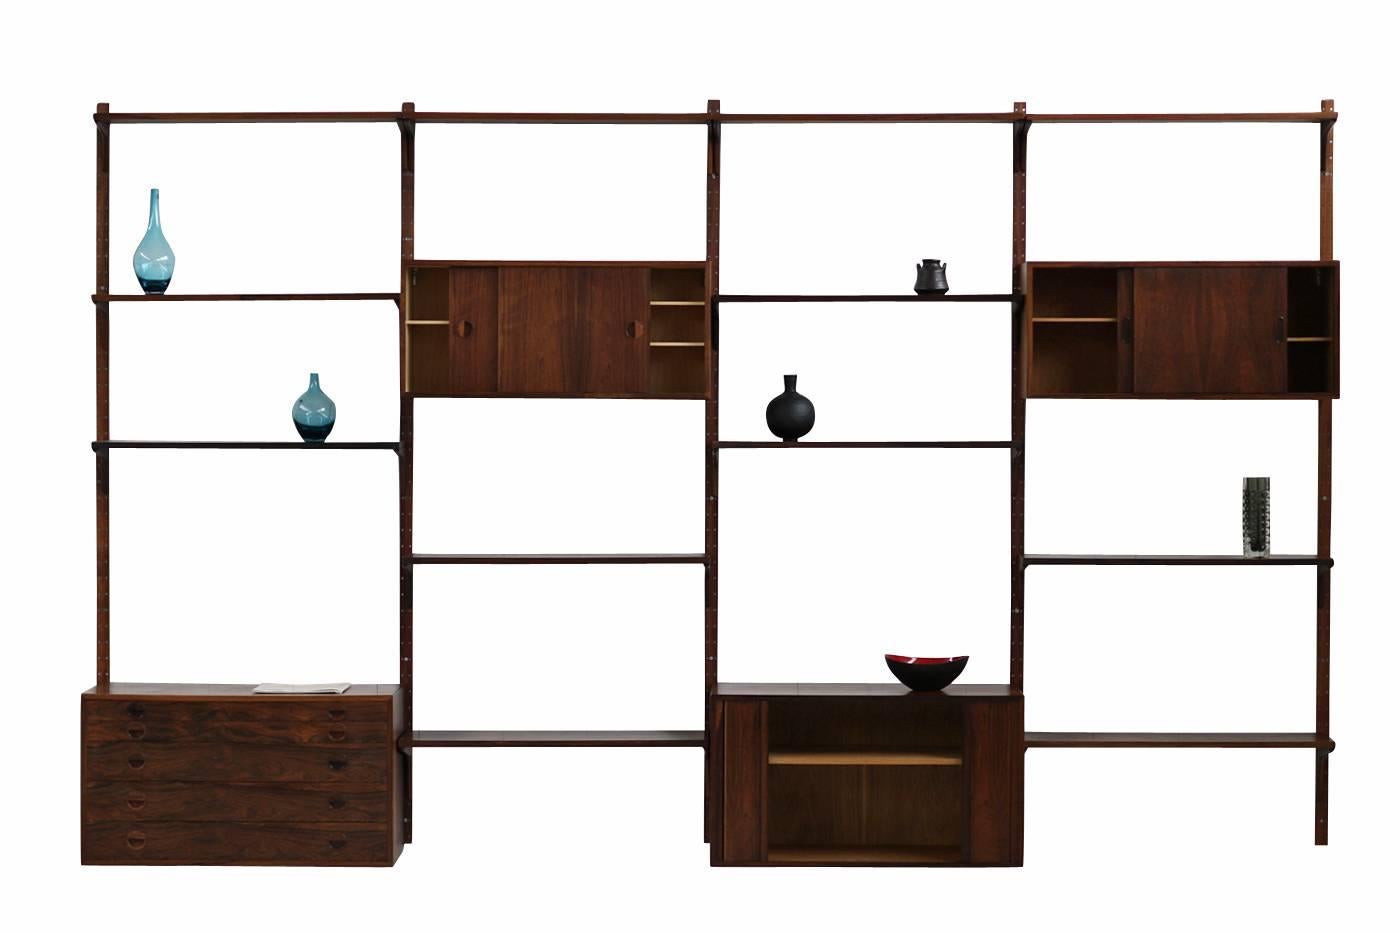 Large Danish 1960s Rosewood Wall Unit by Rud Thygesen for HG Møbler Shelf 2